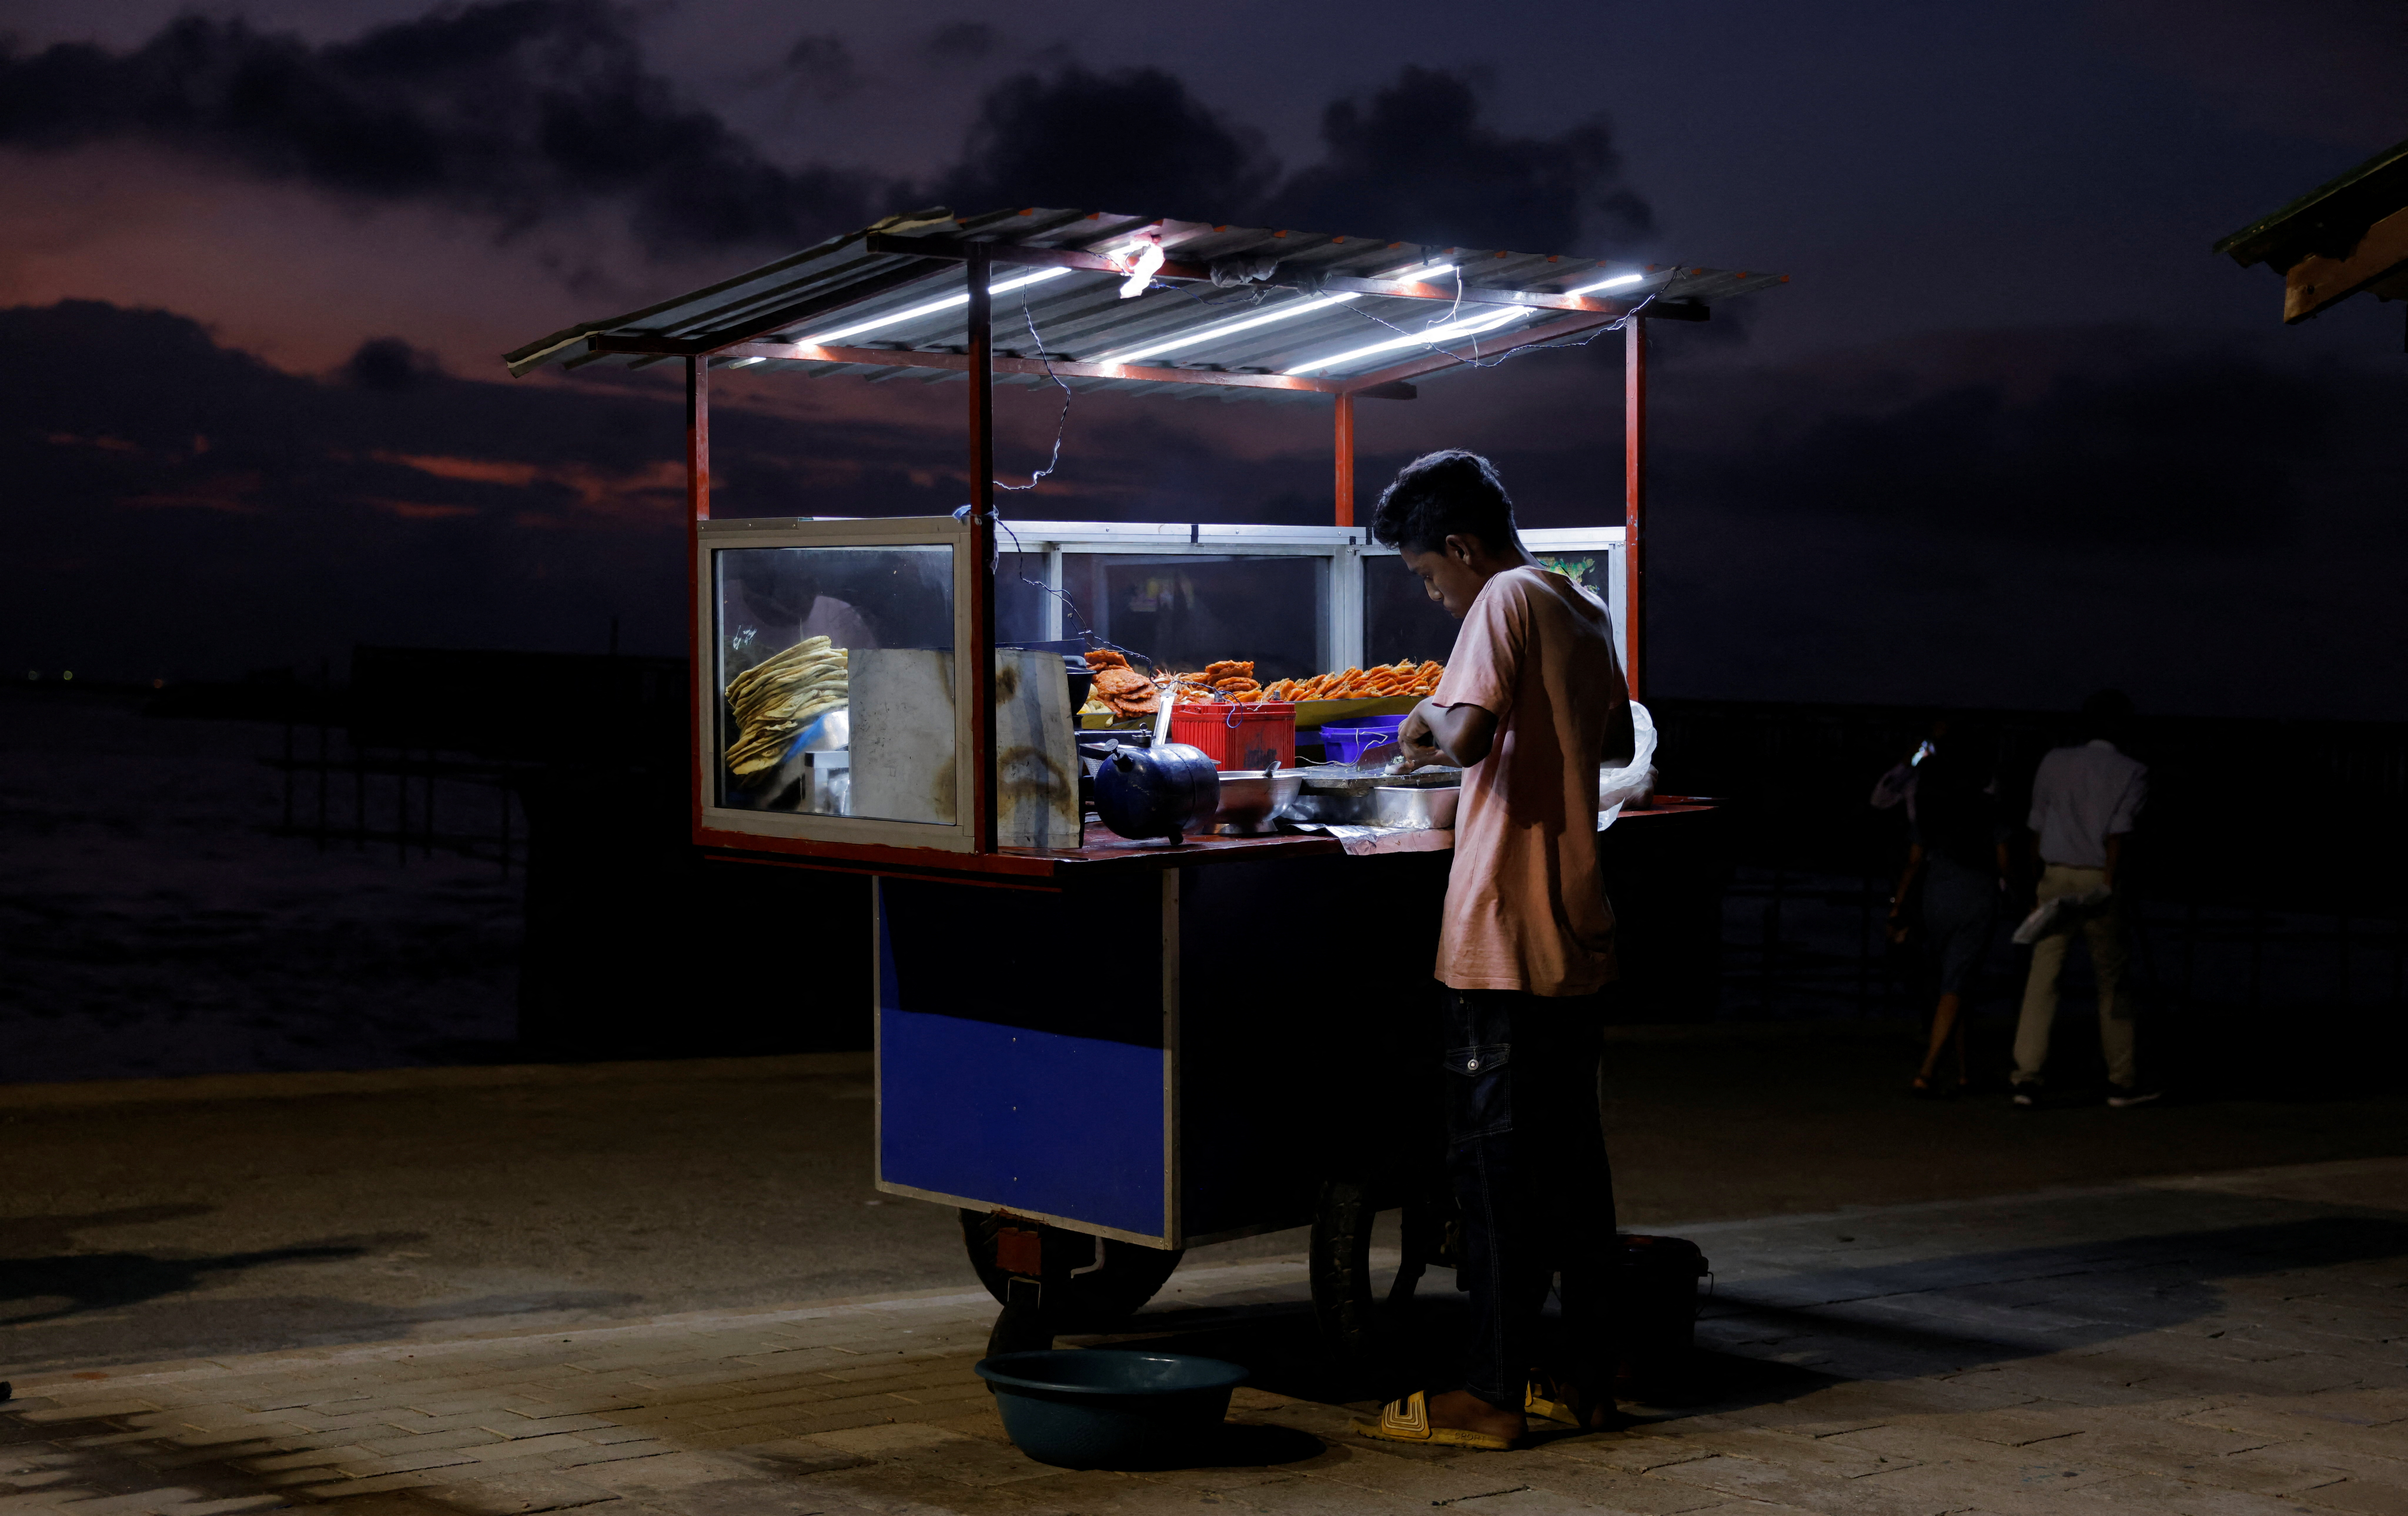 A vendor cooks food for customers in his food cart at Galle Face Green, in Colombo